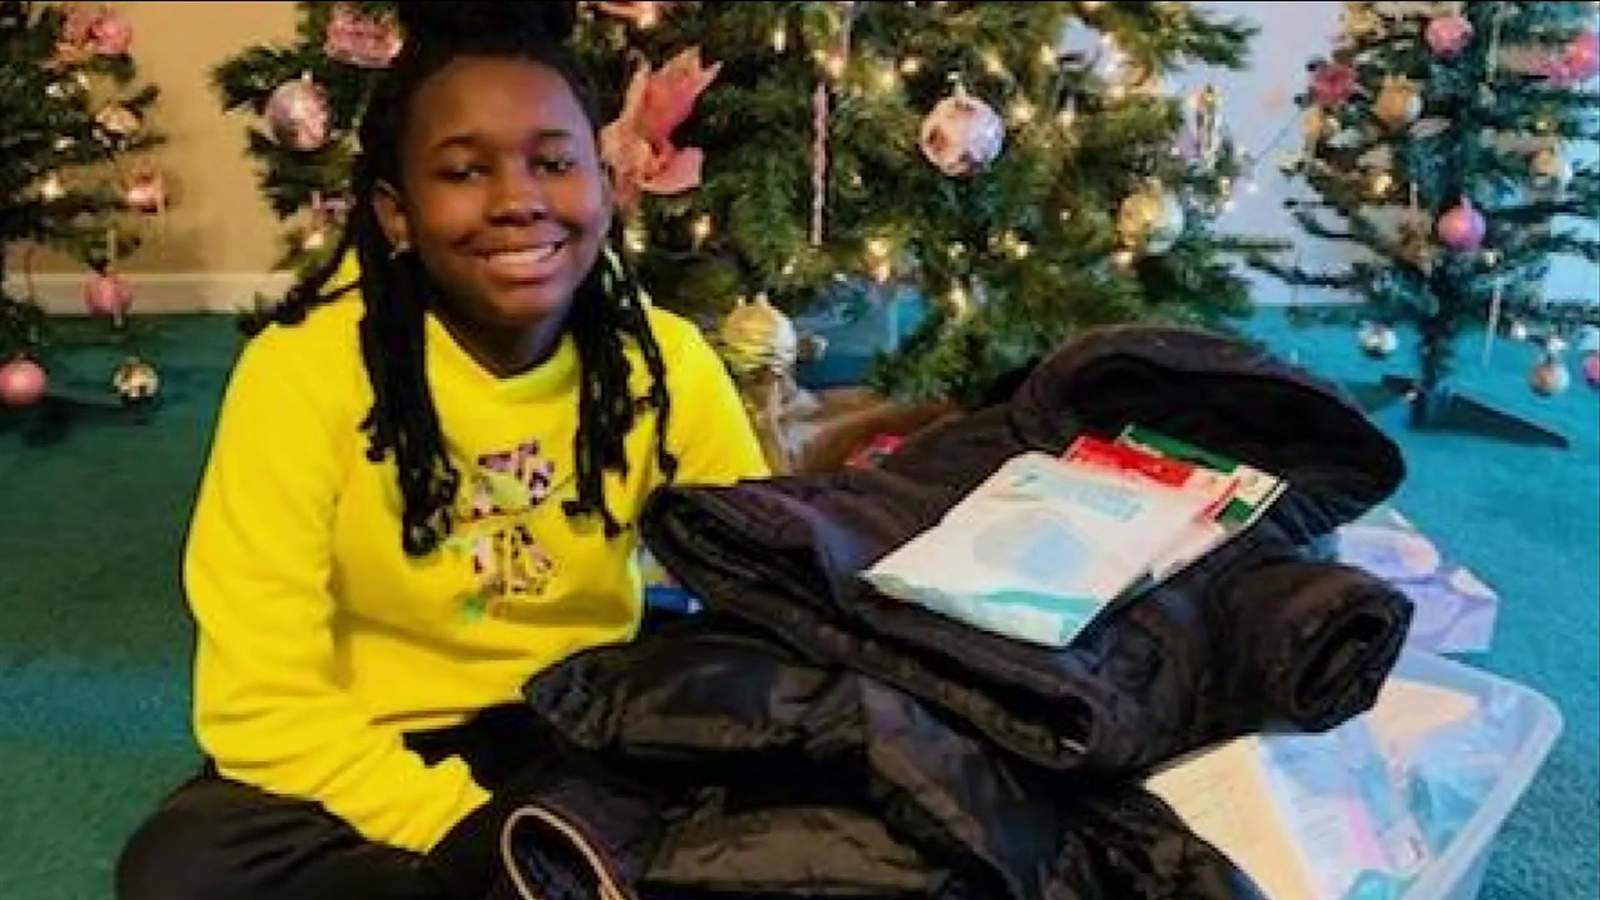 12-year-old Jacksonville girl collecting coats and masks to help those in need